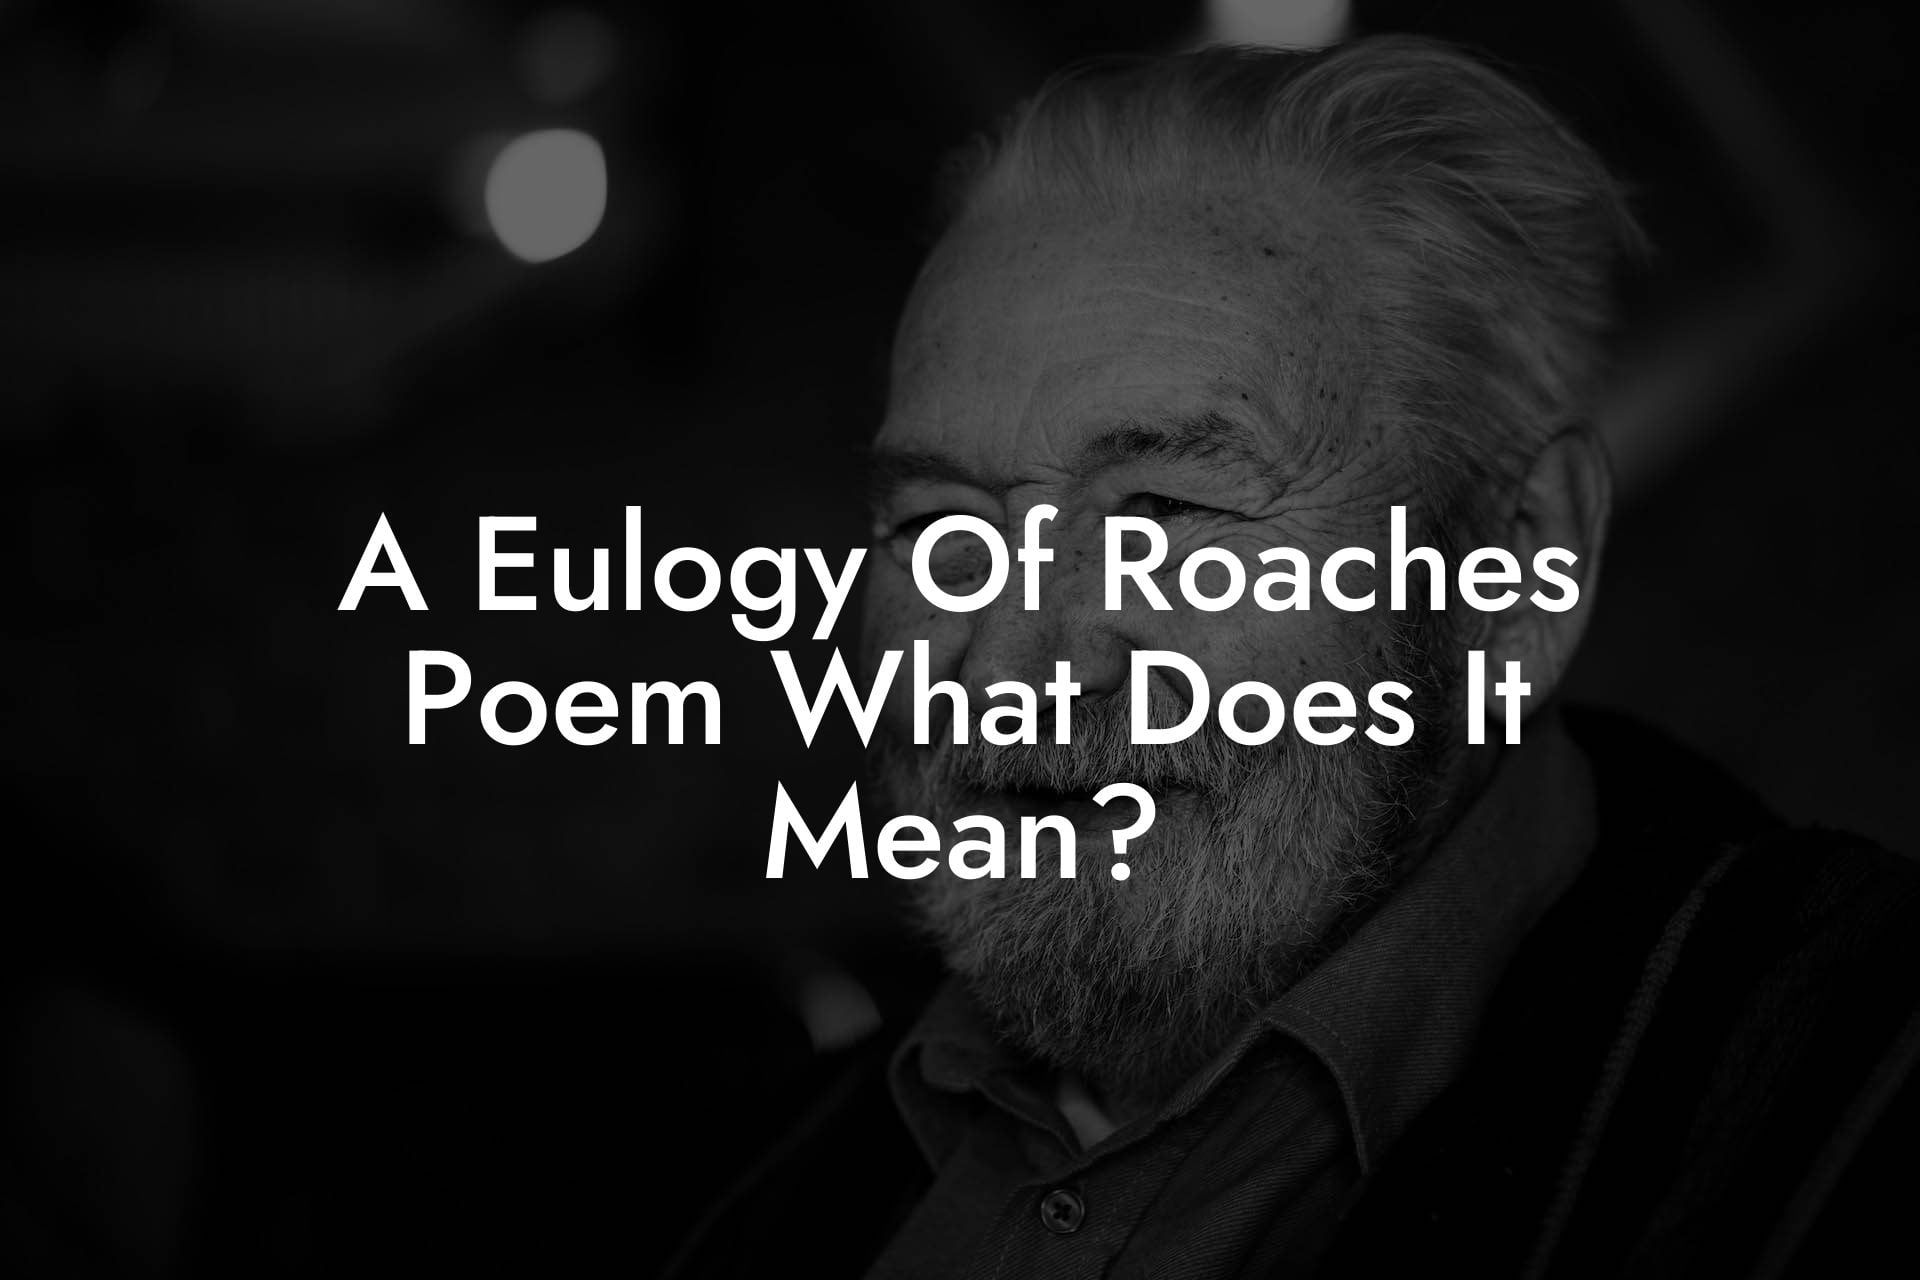 A Eulogy Of Roaches Poem What Does It Mean?